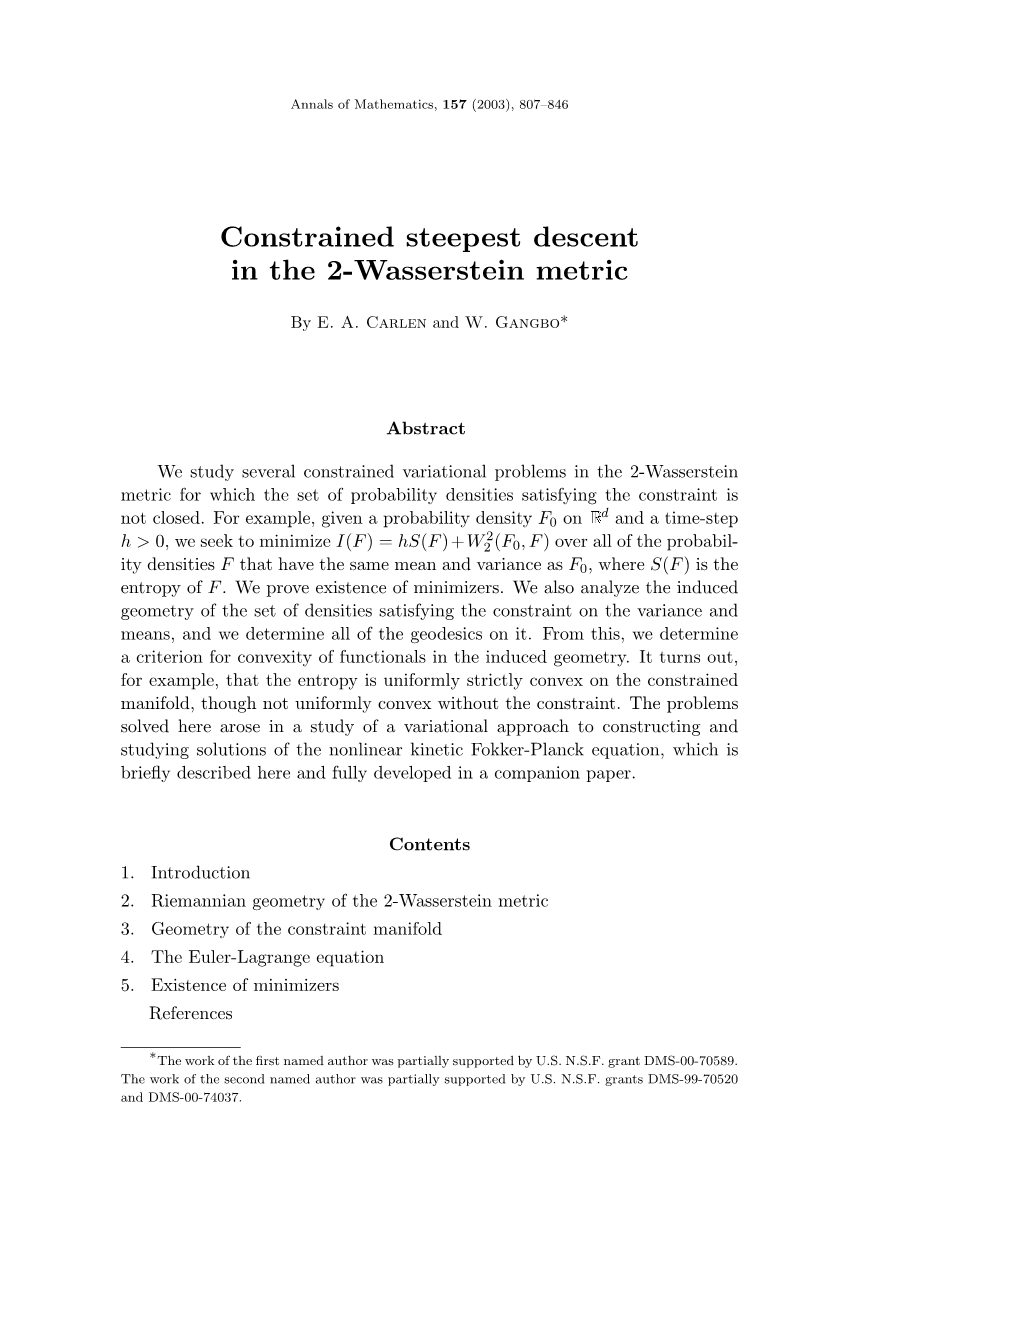 Constrained Steepest Descent in the 2-Wasserstein Metric